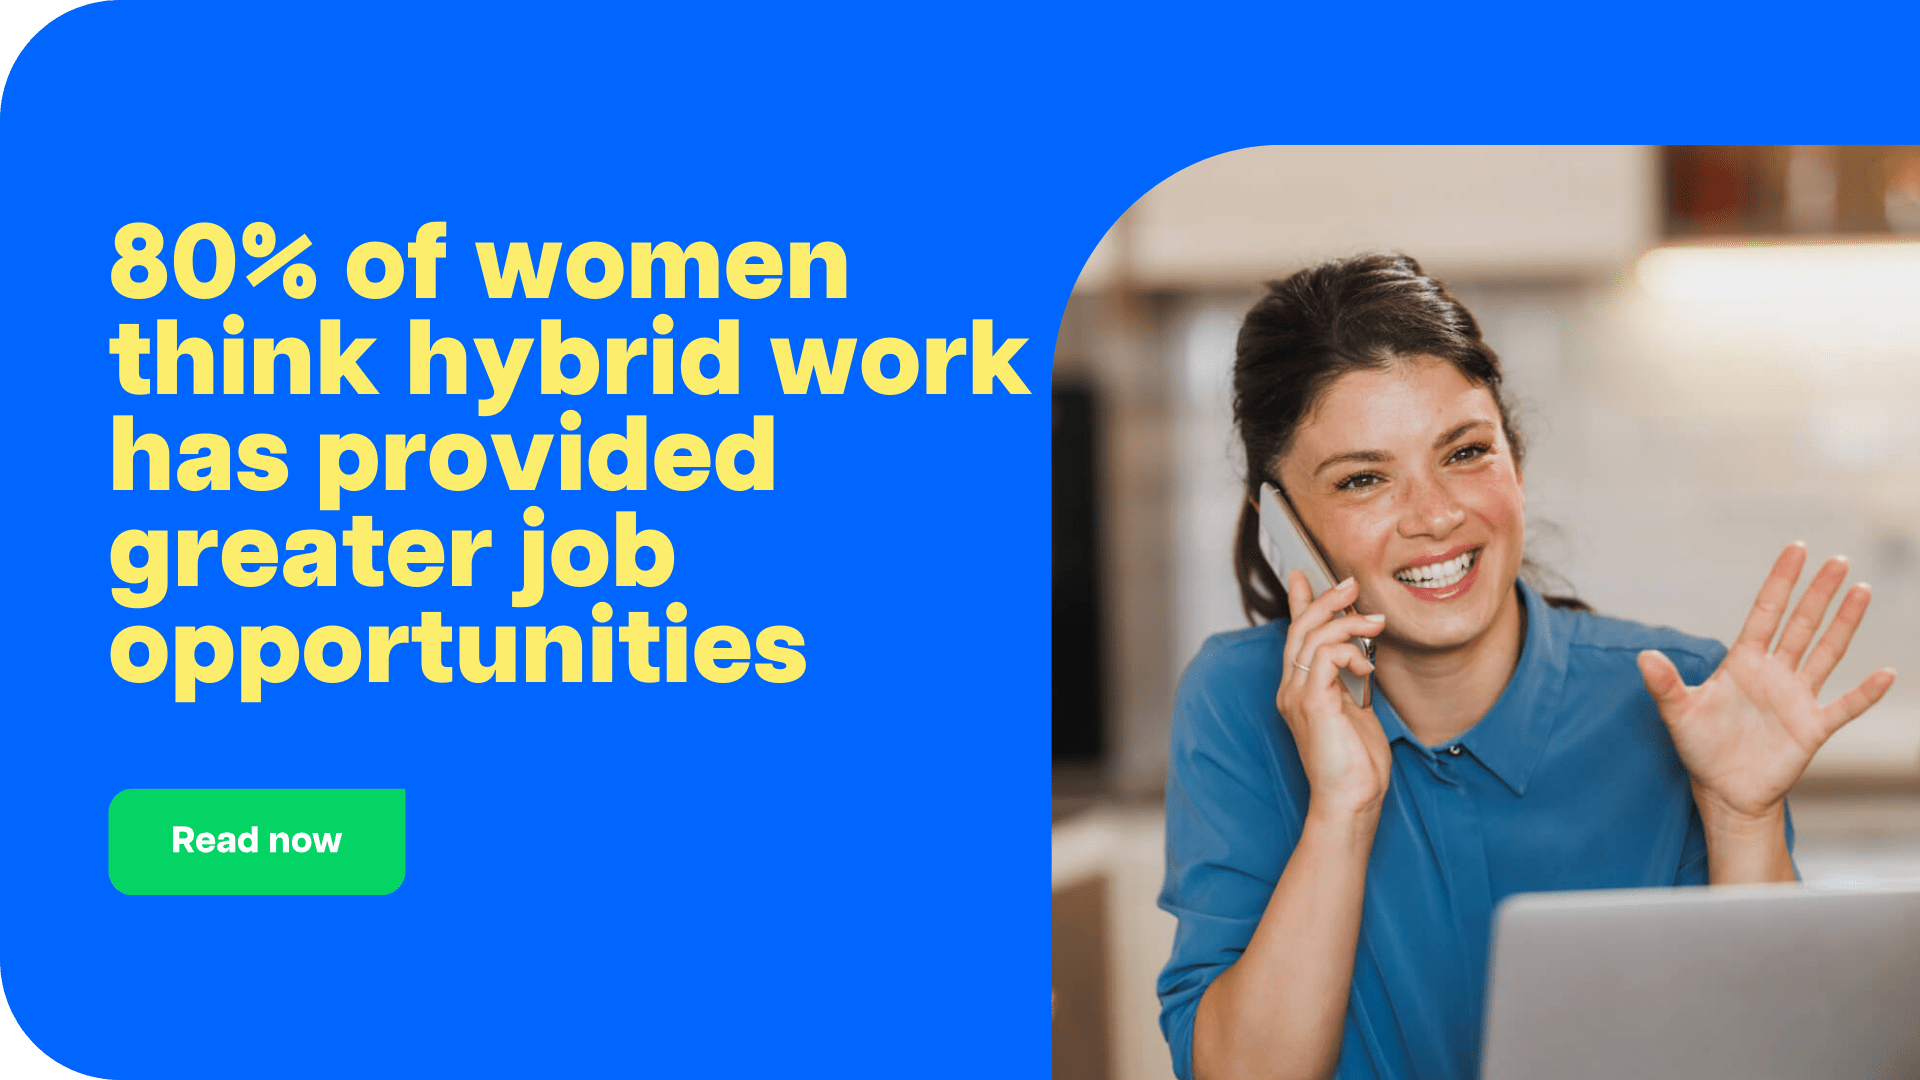 80% of women think hybrid work has provided greater job opportunities CTA